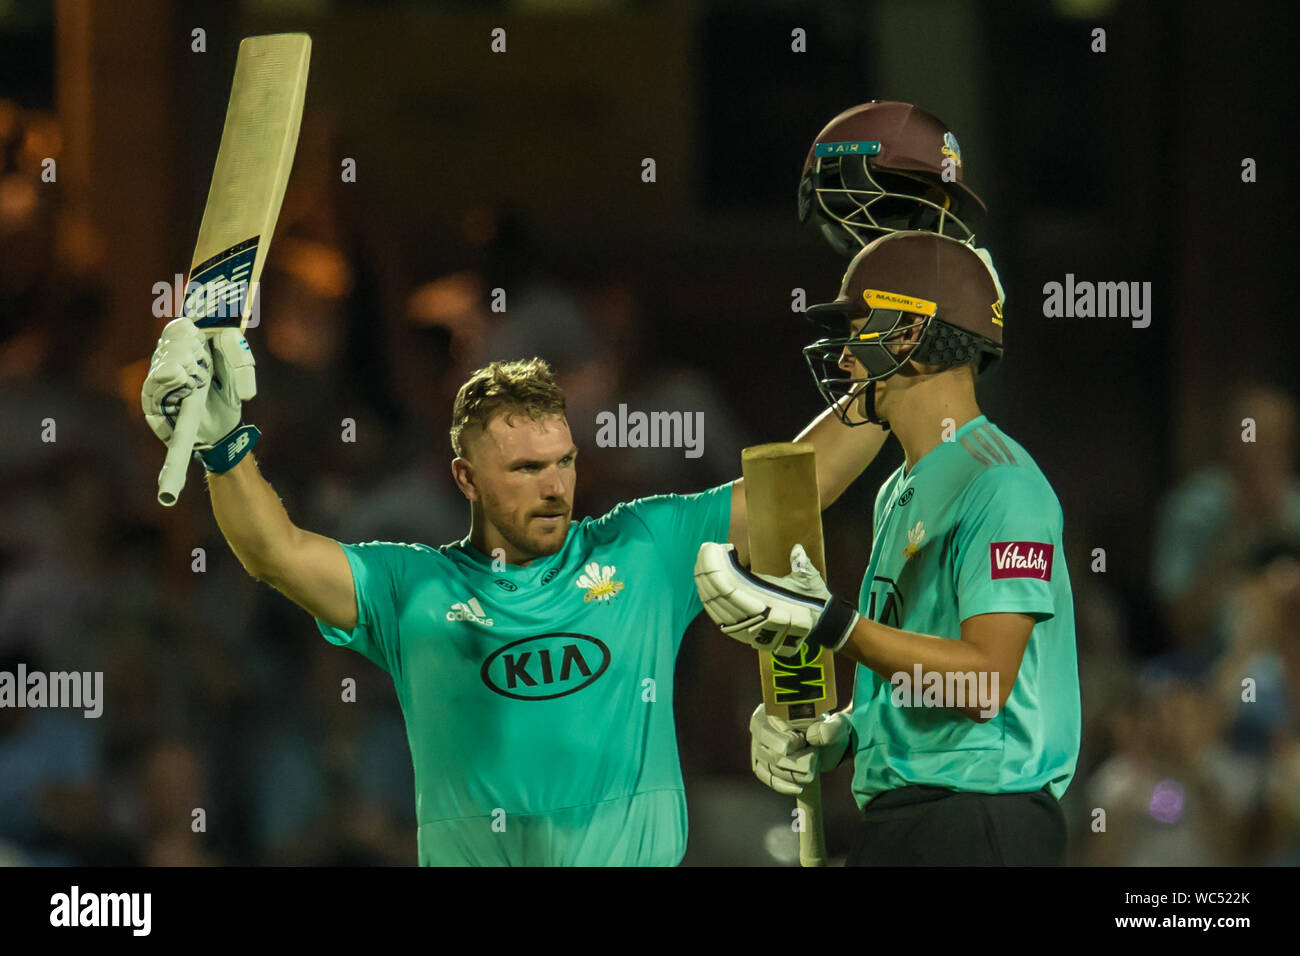 London, UK. 27 August, 2019. Aaron Finch salutes the crowd after getting his hundred batting for Surrey against Somerset in the Vitality T20 Blast match at the Kia Oval. David Rowe/Alamy Live News Stock Photo